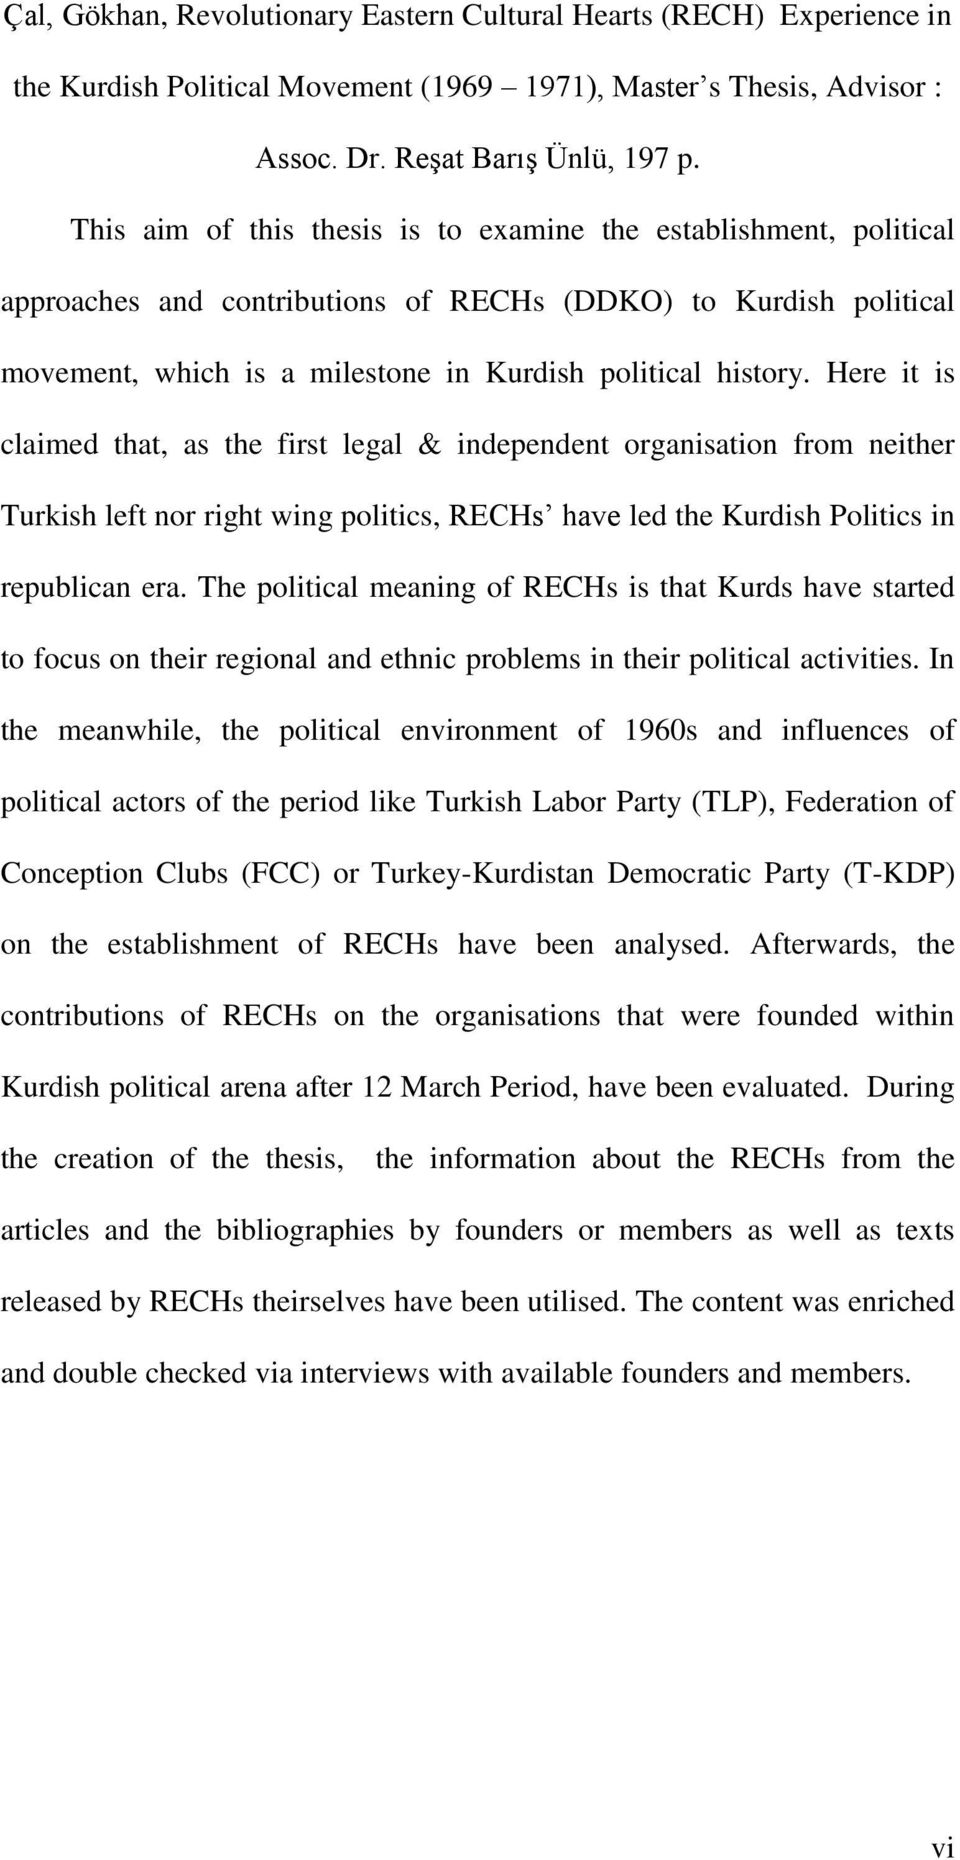 Here it is claimed that, as the first legal & independent organisation from neither Turkish left nor right wing politics, RECHs have led the Kurdish Politics in republican era.